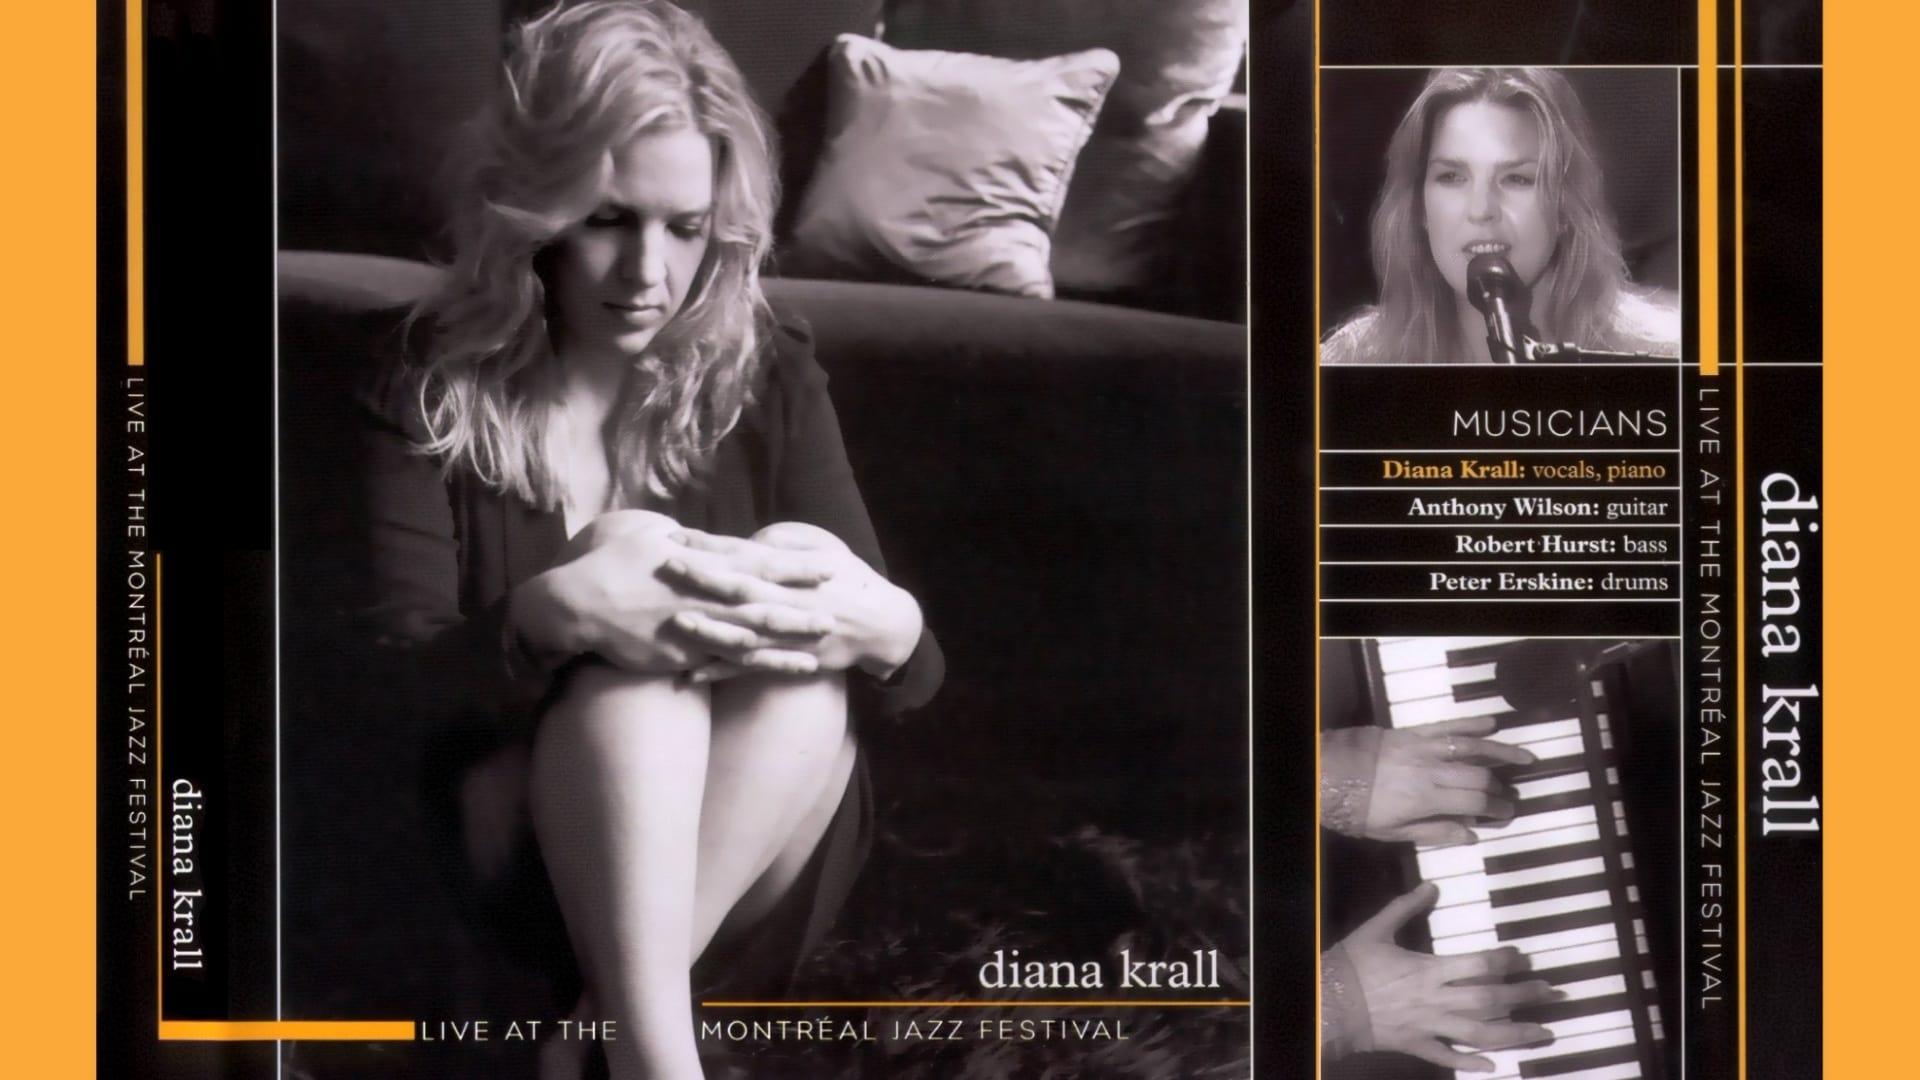 Diana Krall | Live at the Montreal Jazz Festival backdrop